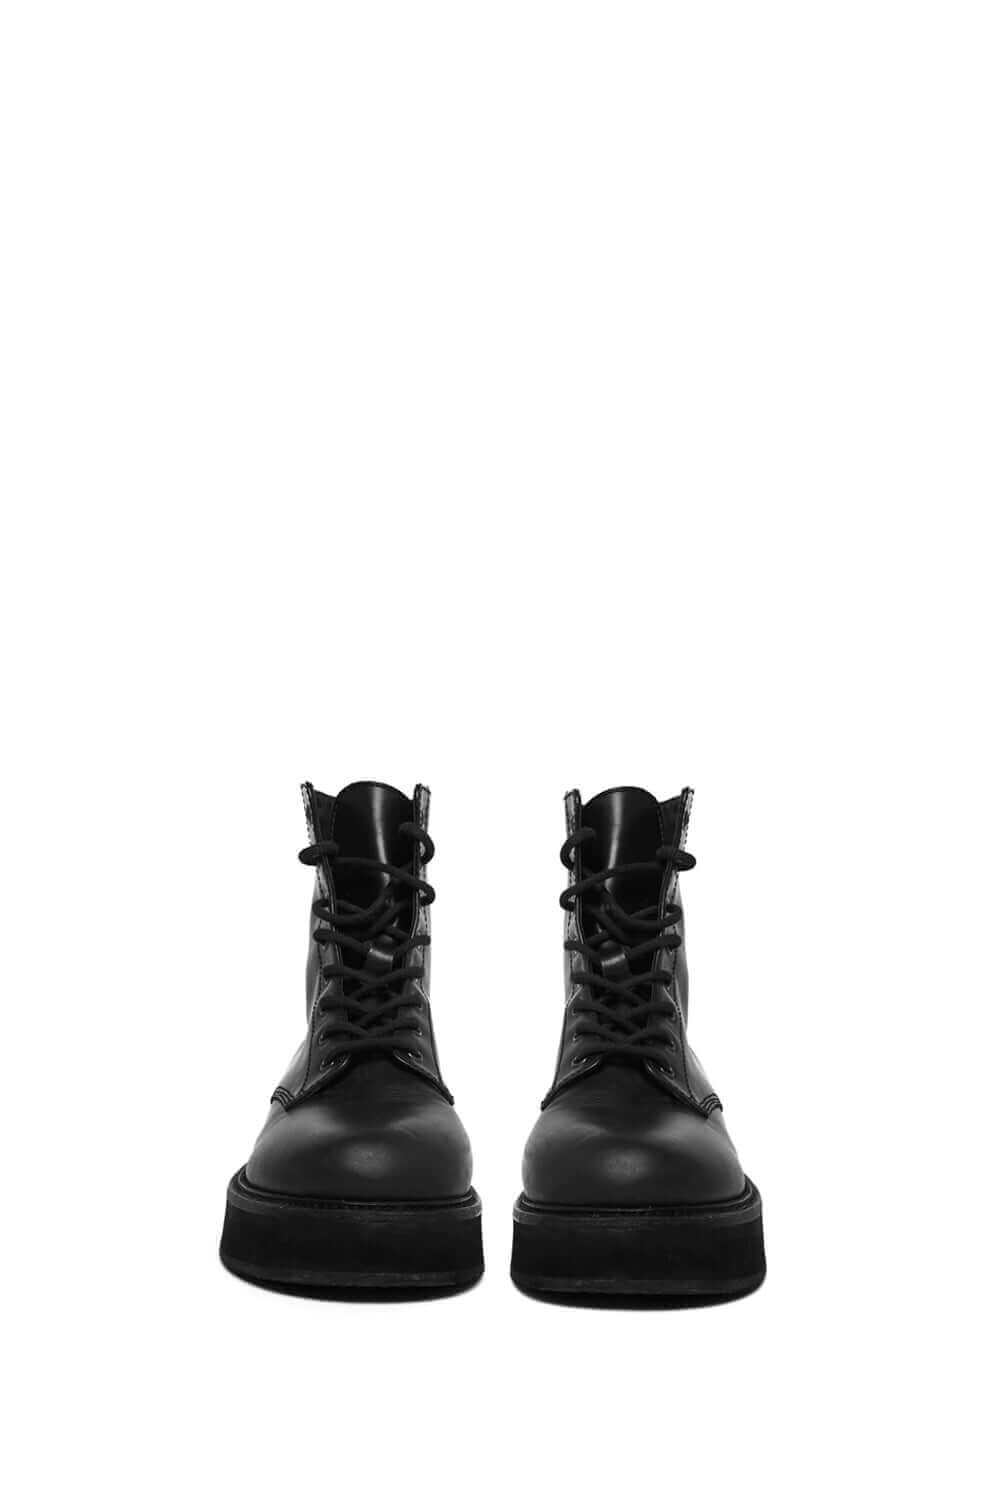 ARMY BOOT Black leather boots. Black laces. Sole height: 4 cm. Made in Italy. HTC LOS ANGELES